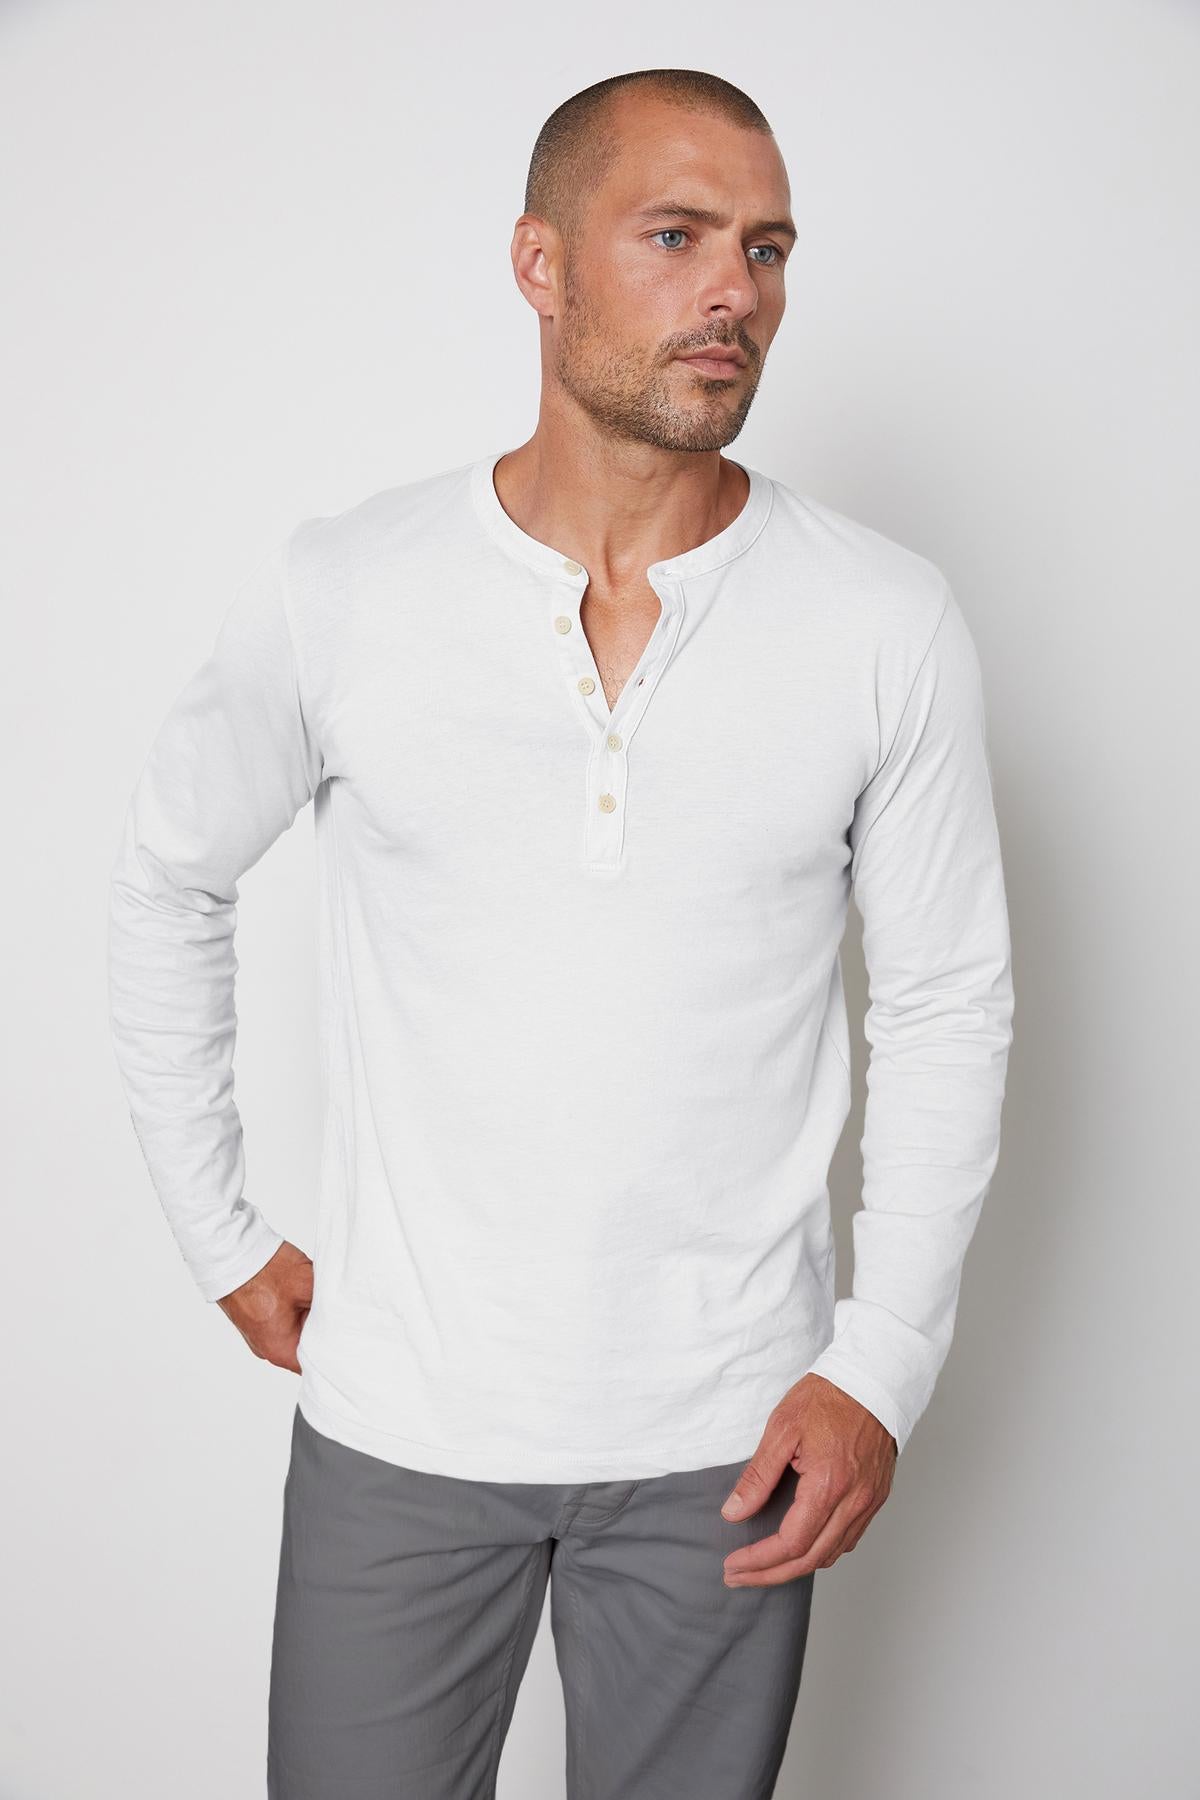 A man wearing a lightweight white Velvet by Graham & Spencer ALVARO COTTON JERSEY HENLEY shirt and gray pants.-36273890296001